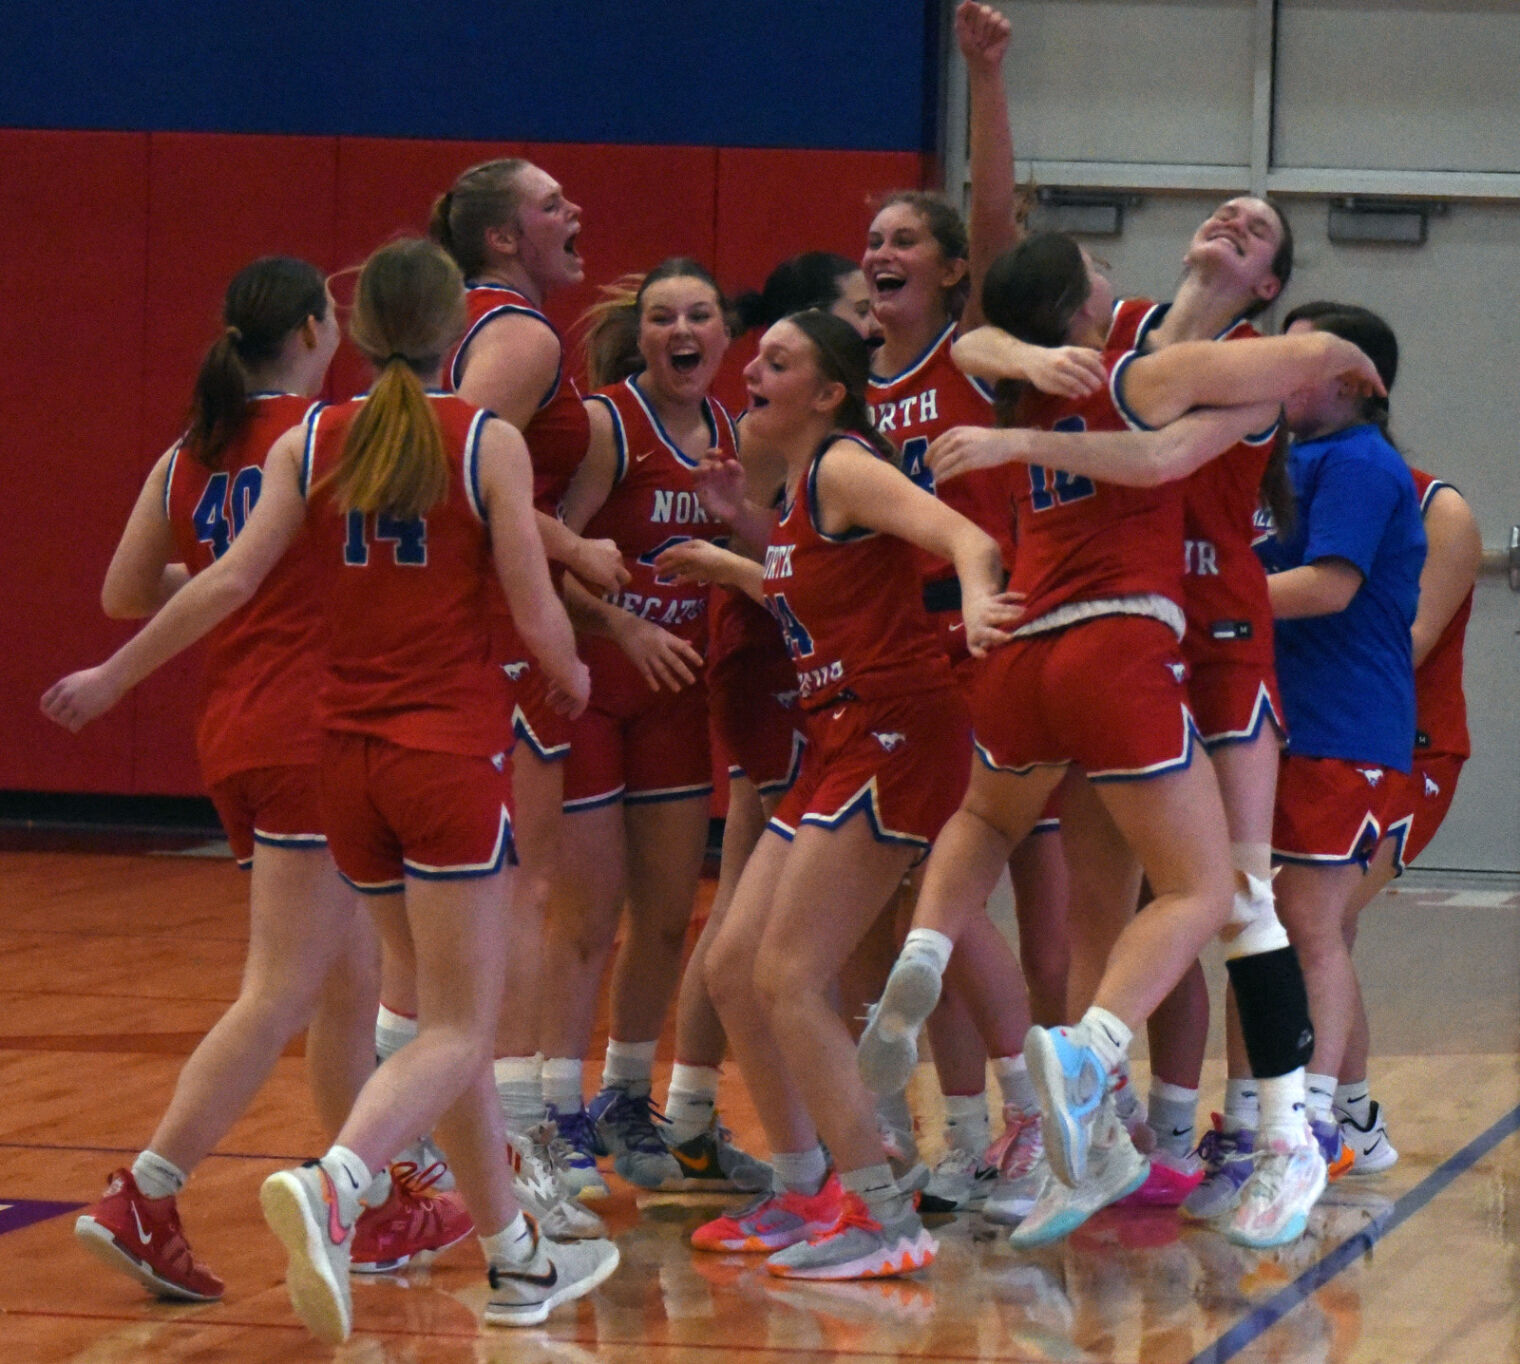 North Decatur Faces Linton-Stockton in Regional Title Clash in Girls Basketball